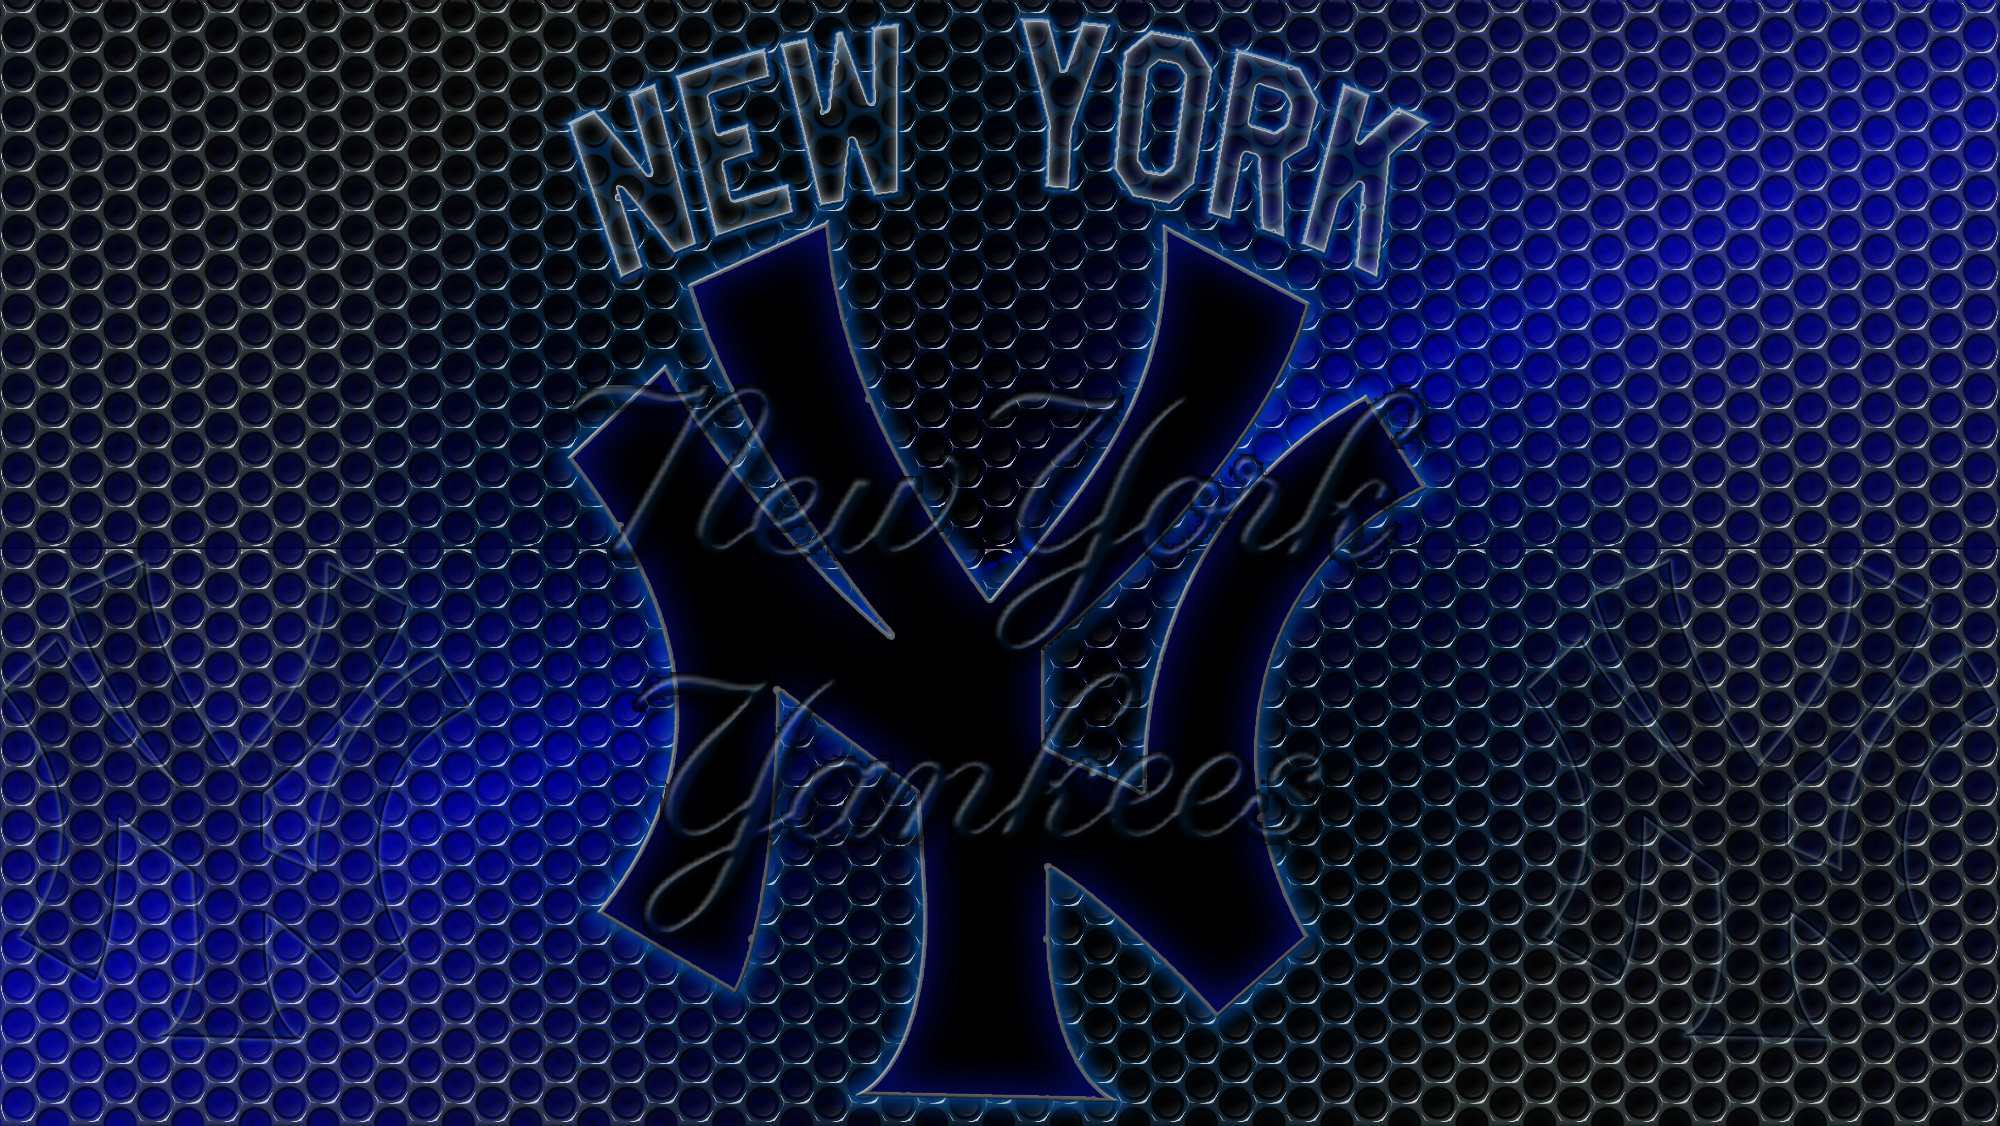 Wallpaper Pictures Image And Photos New York Yankees